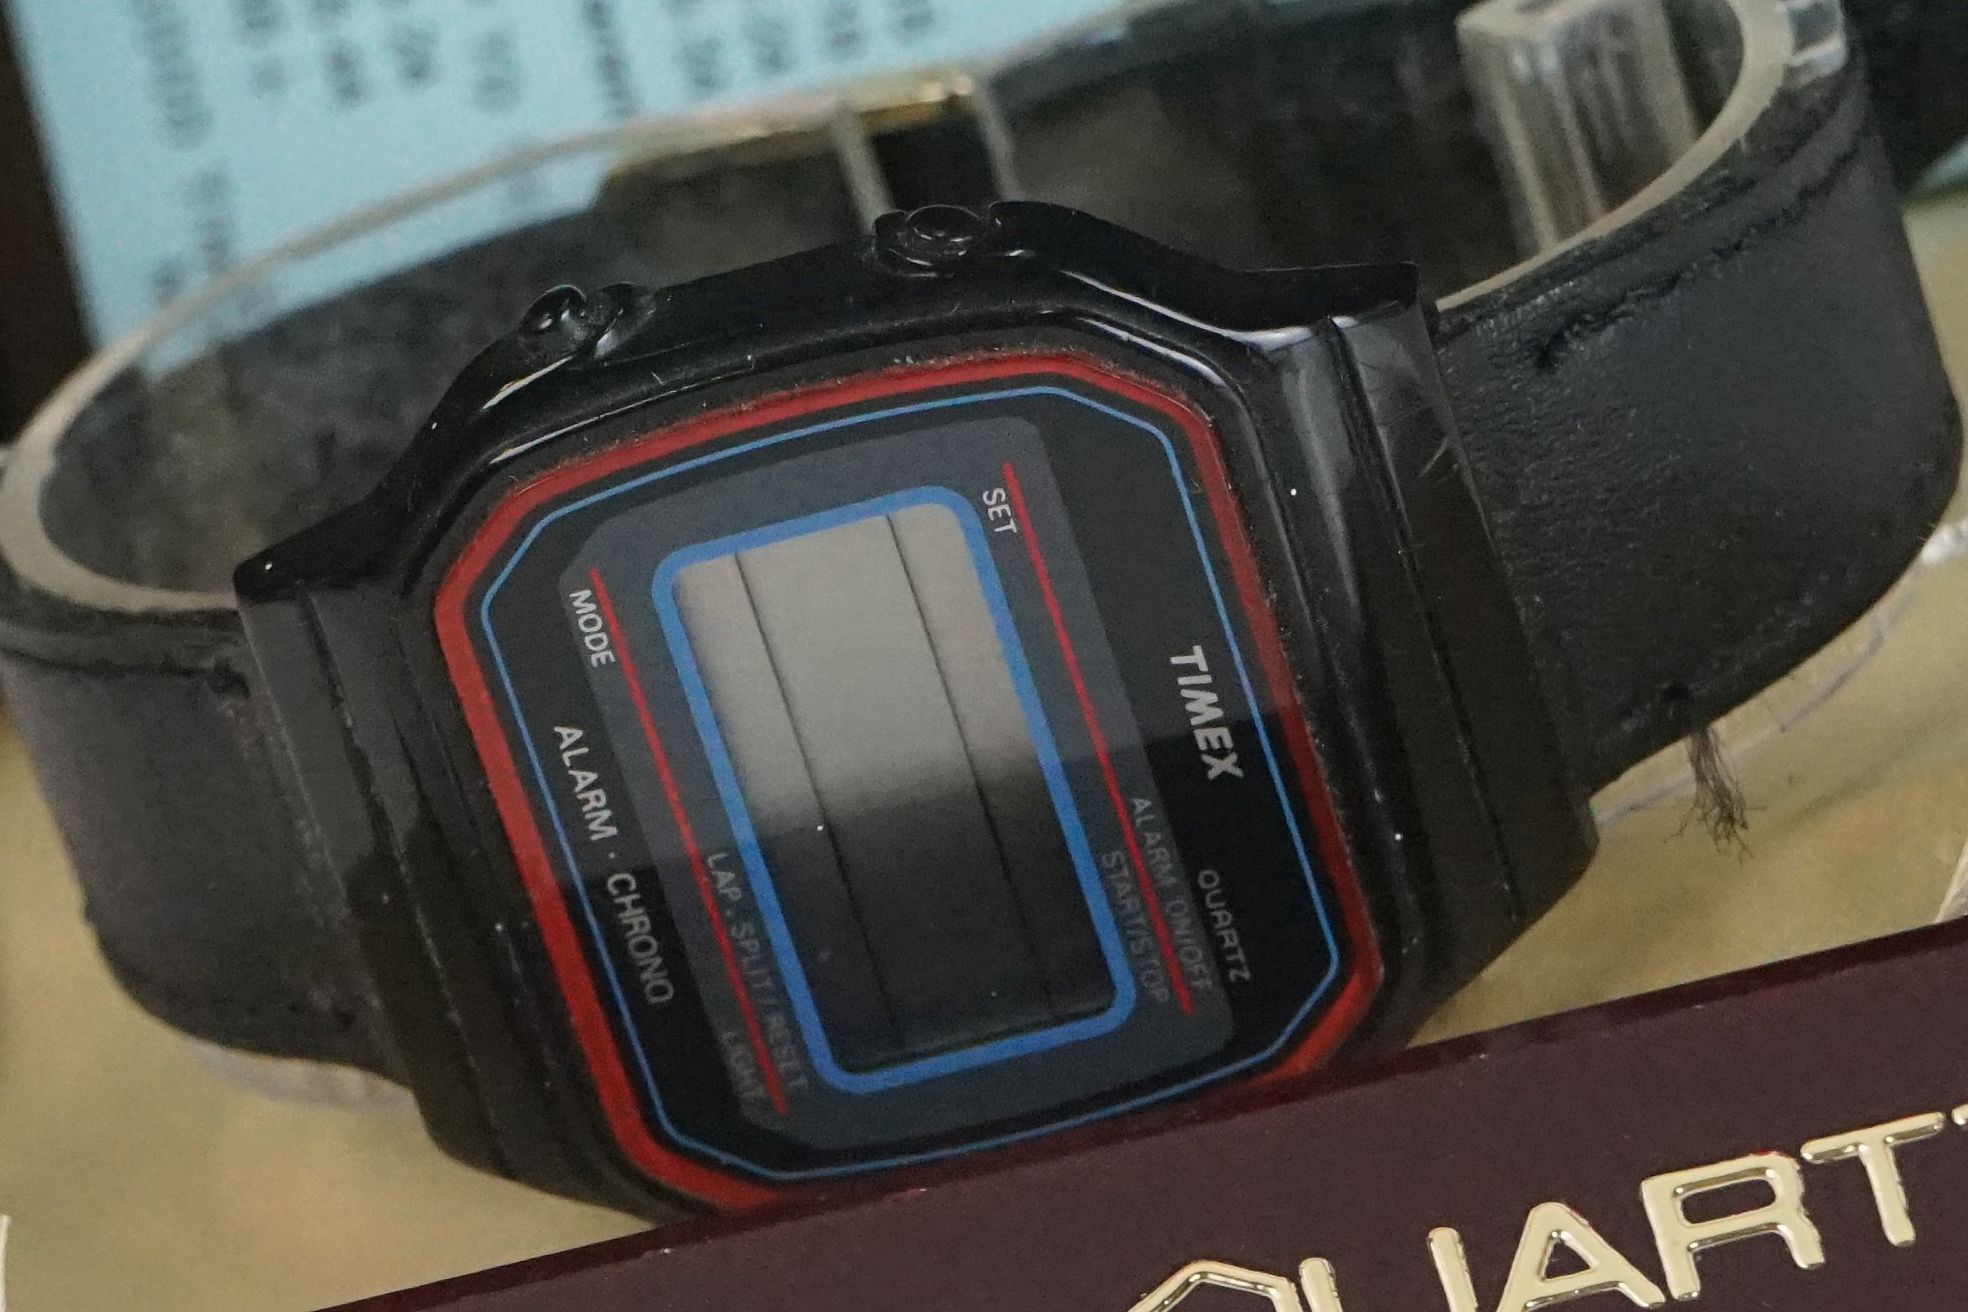 Collection of LCD Watches including Seiko, Casio, Lambda, etc - Image 3 of 14